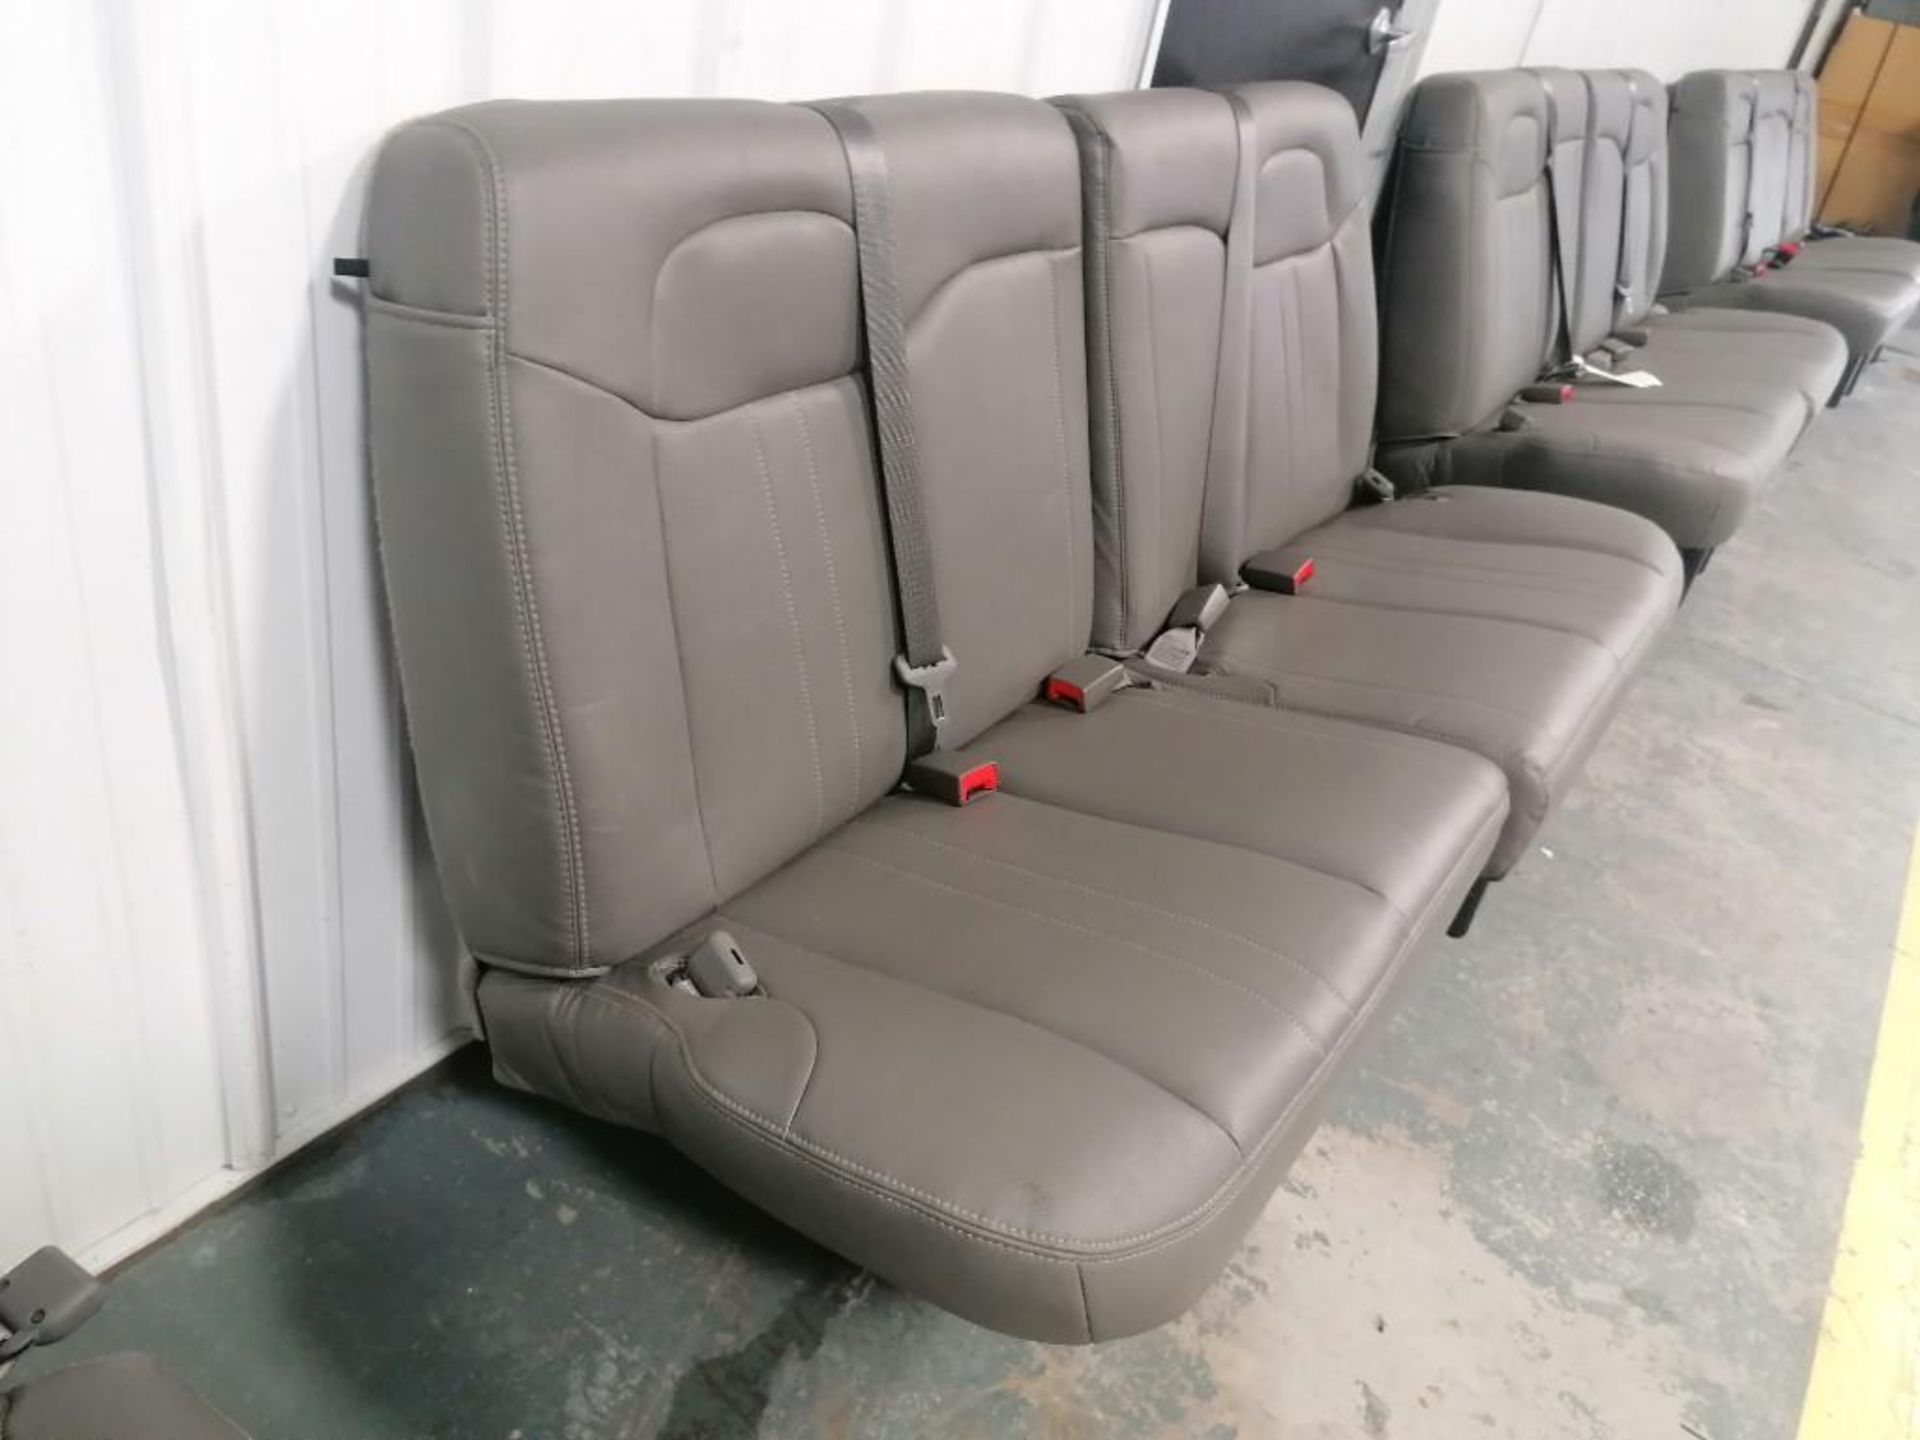 2021 NEW Chevrolet Express Passenger Seat Row. Located in Mt. Pleasant, IA. - Image 3 of 3